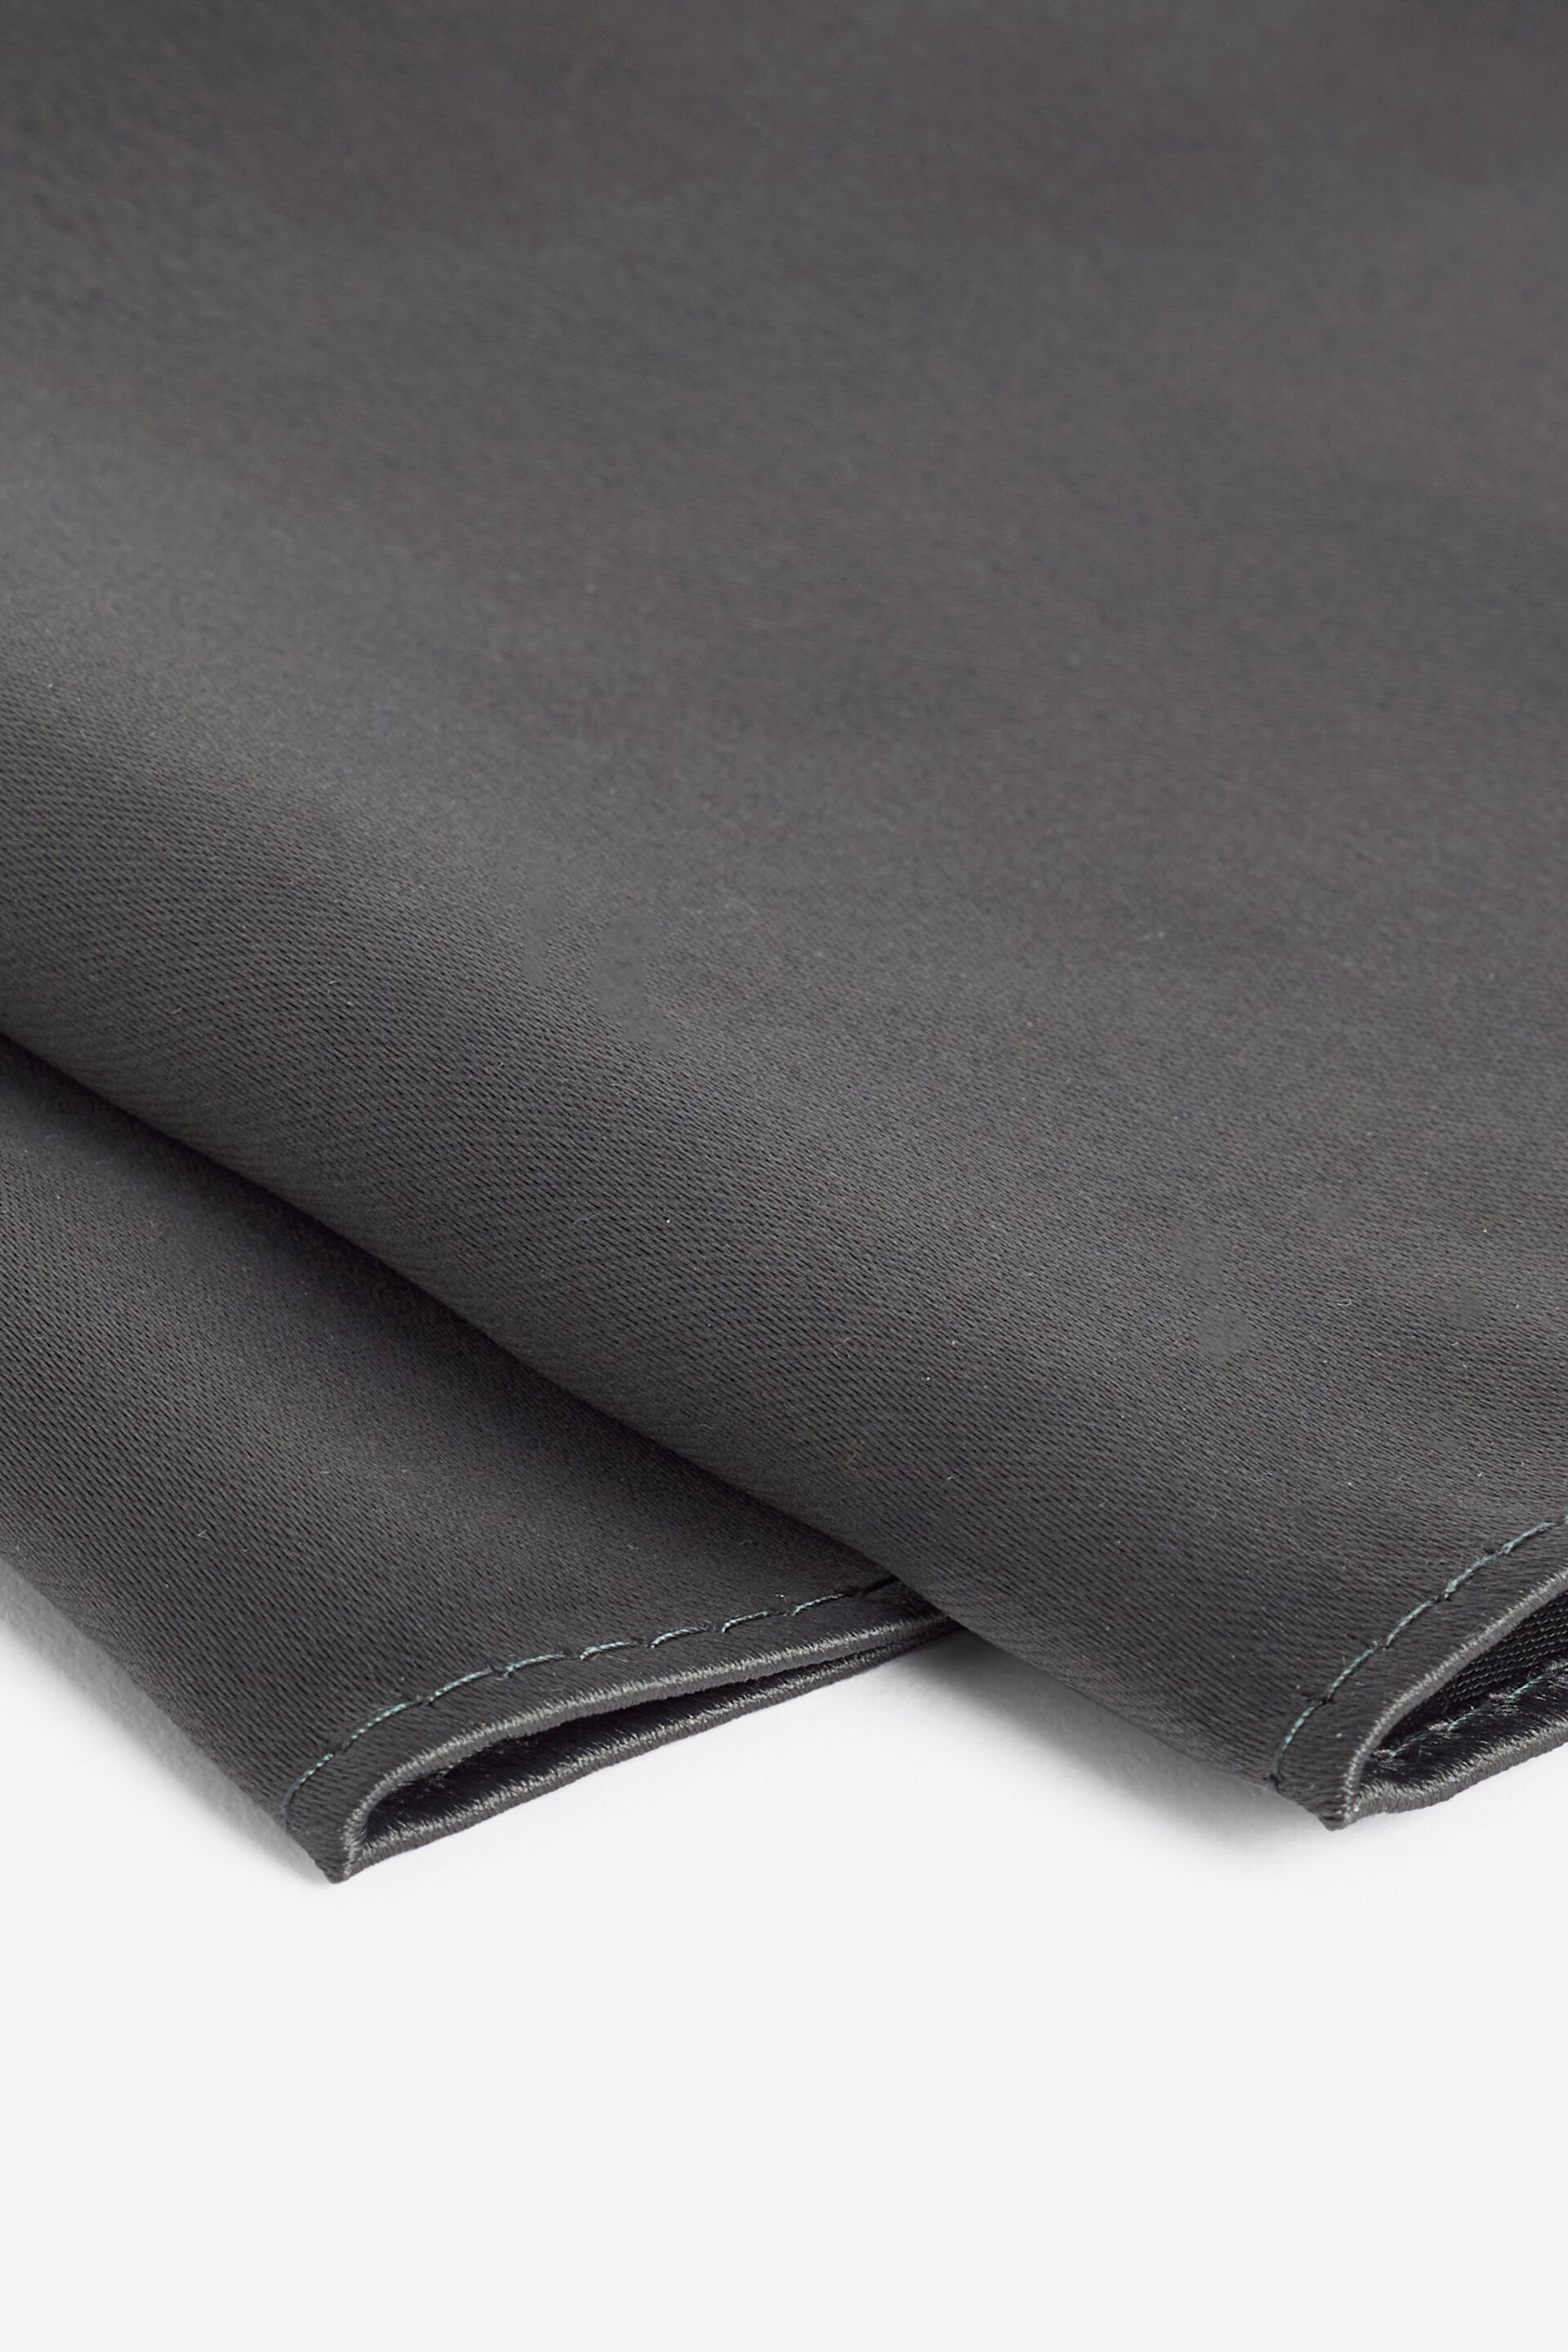 Charcoal Grey Satin Tie And Pocket Square Set - Image 5 of 5